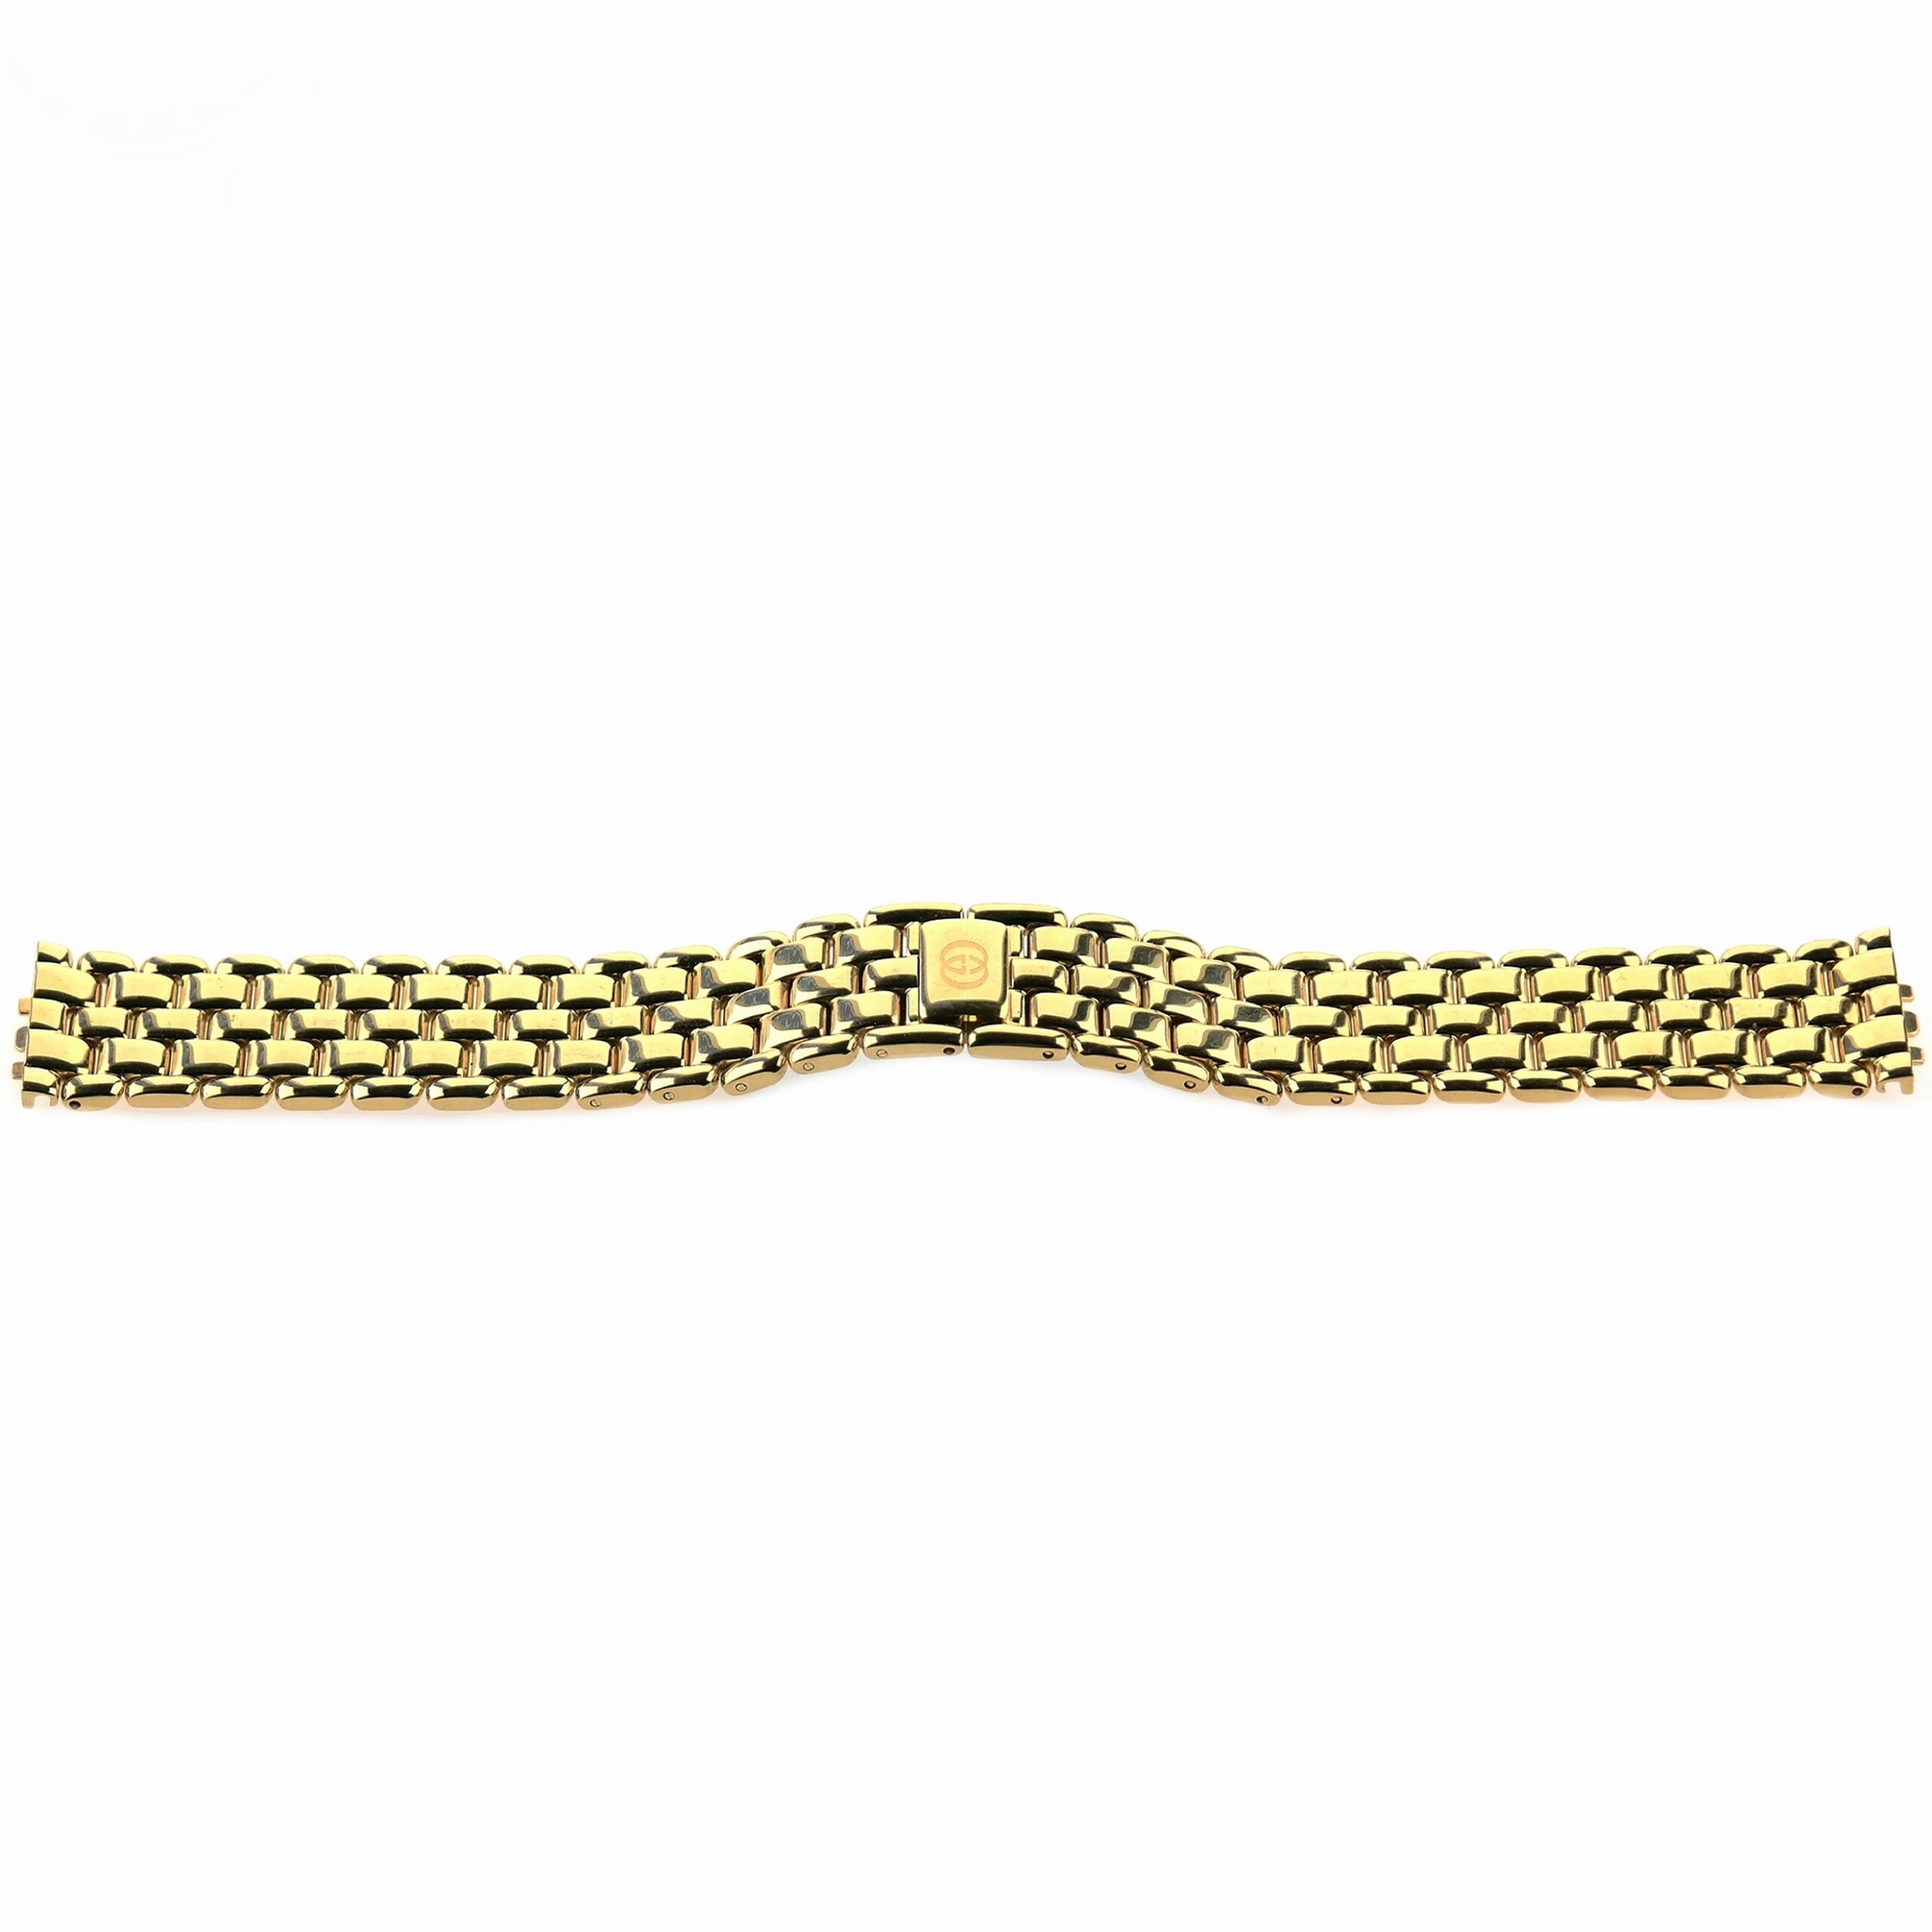 Authentic GUCCI Watch Bracelet - Gold Tone Stainless Steel - 19 mm